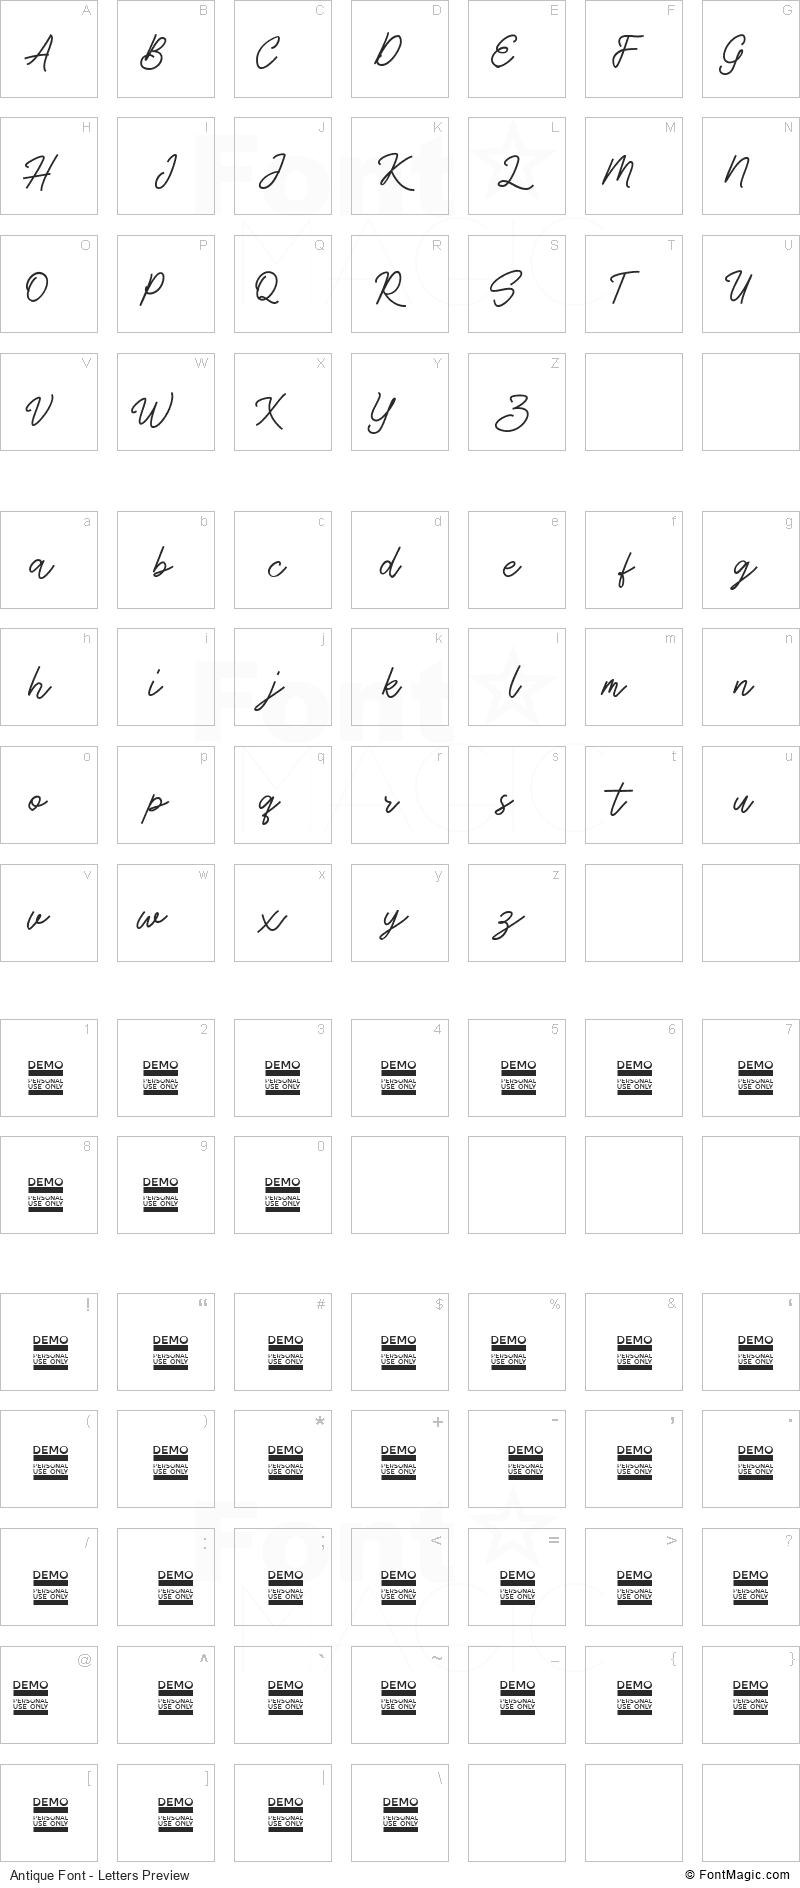 Antique Font - All Latters Preview Chart